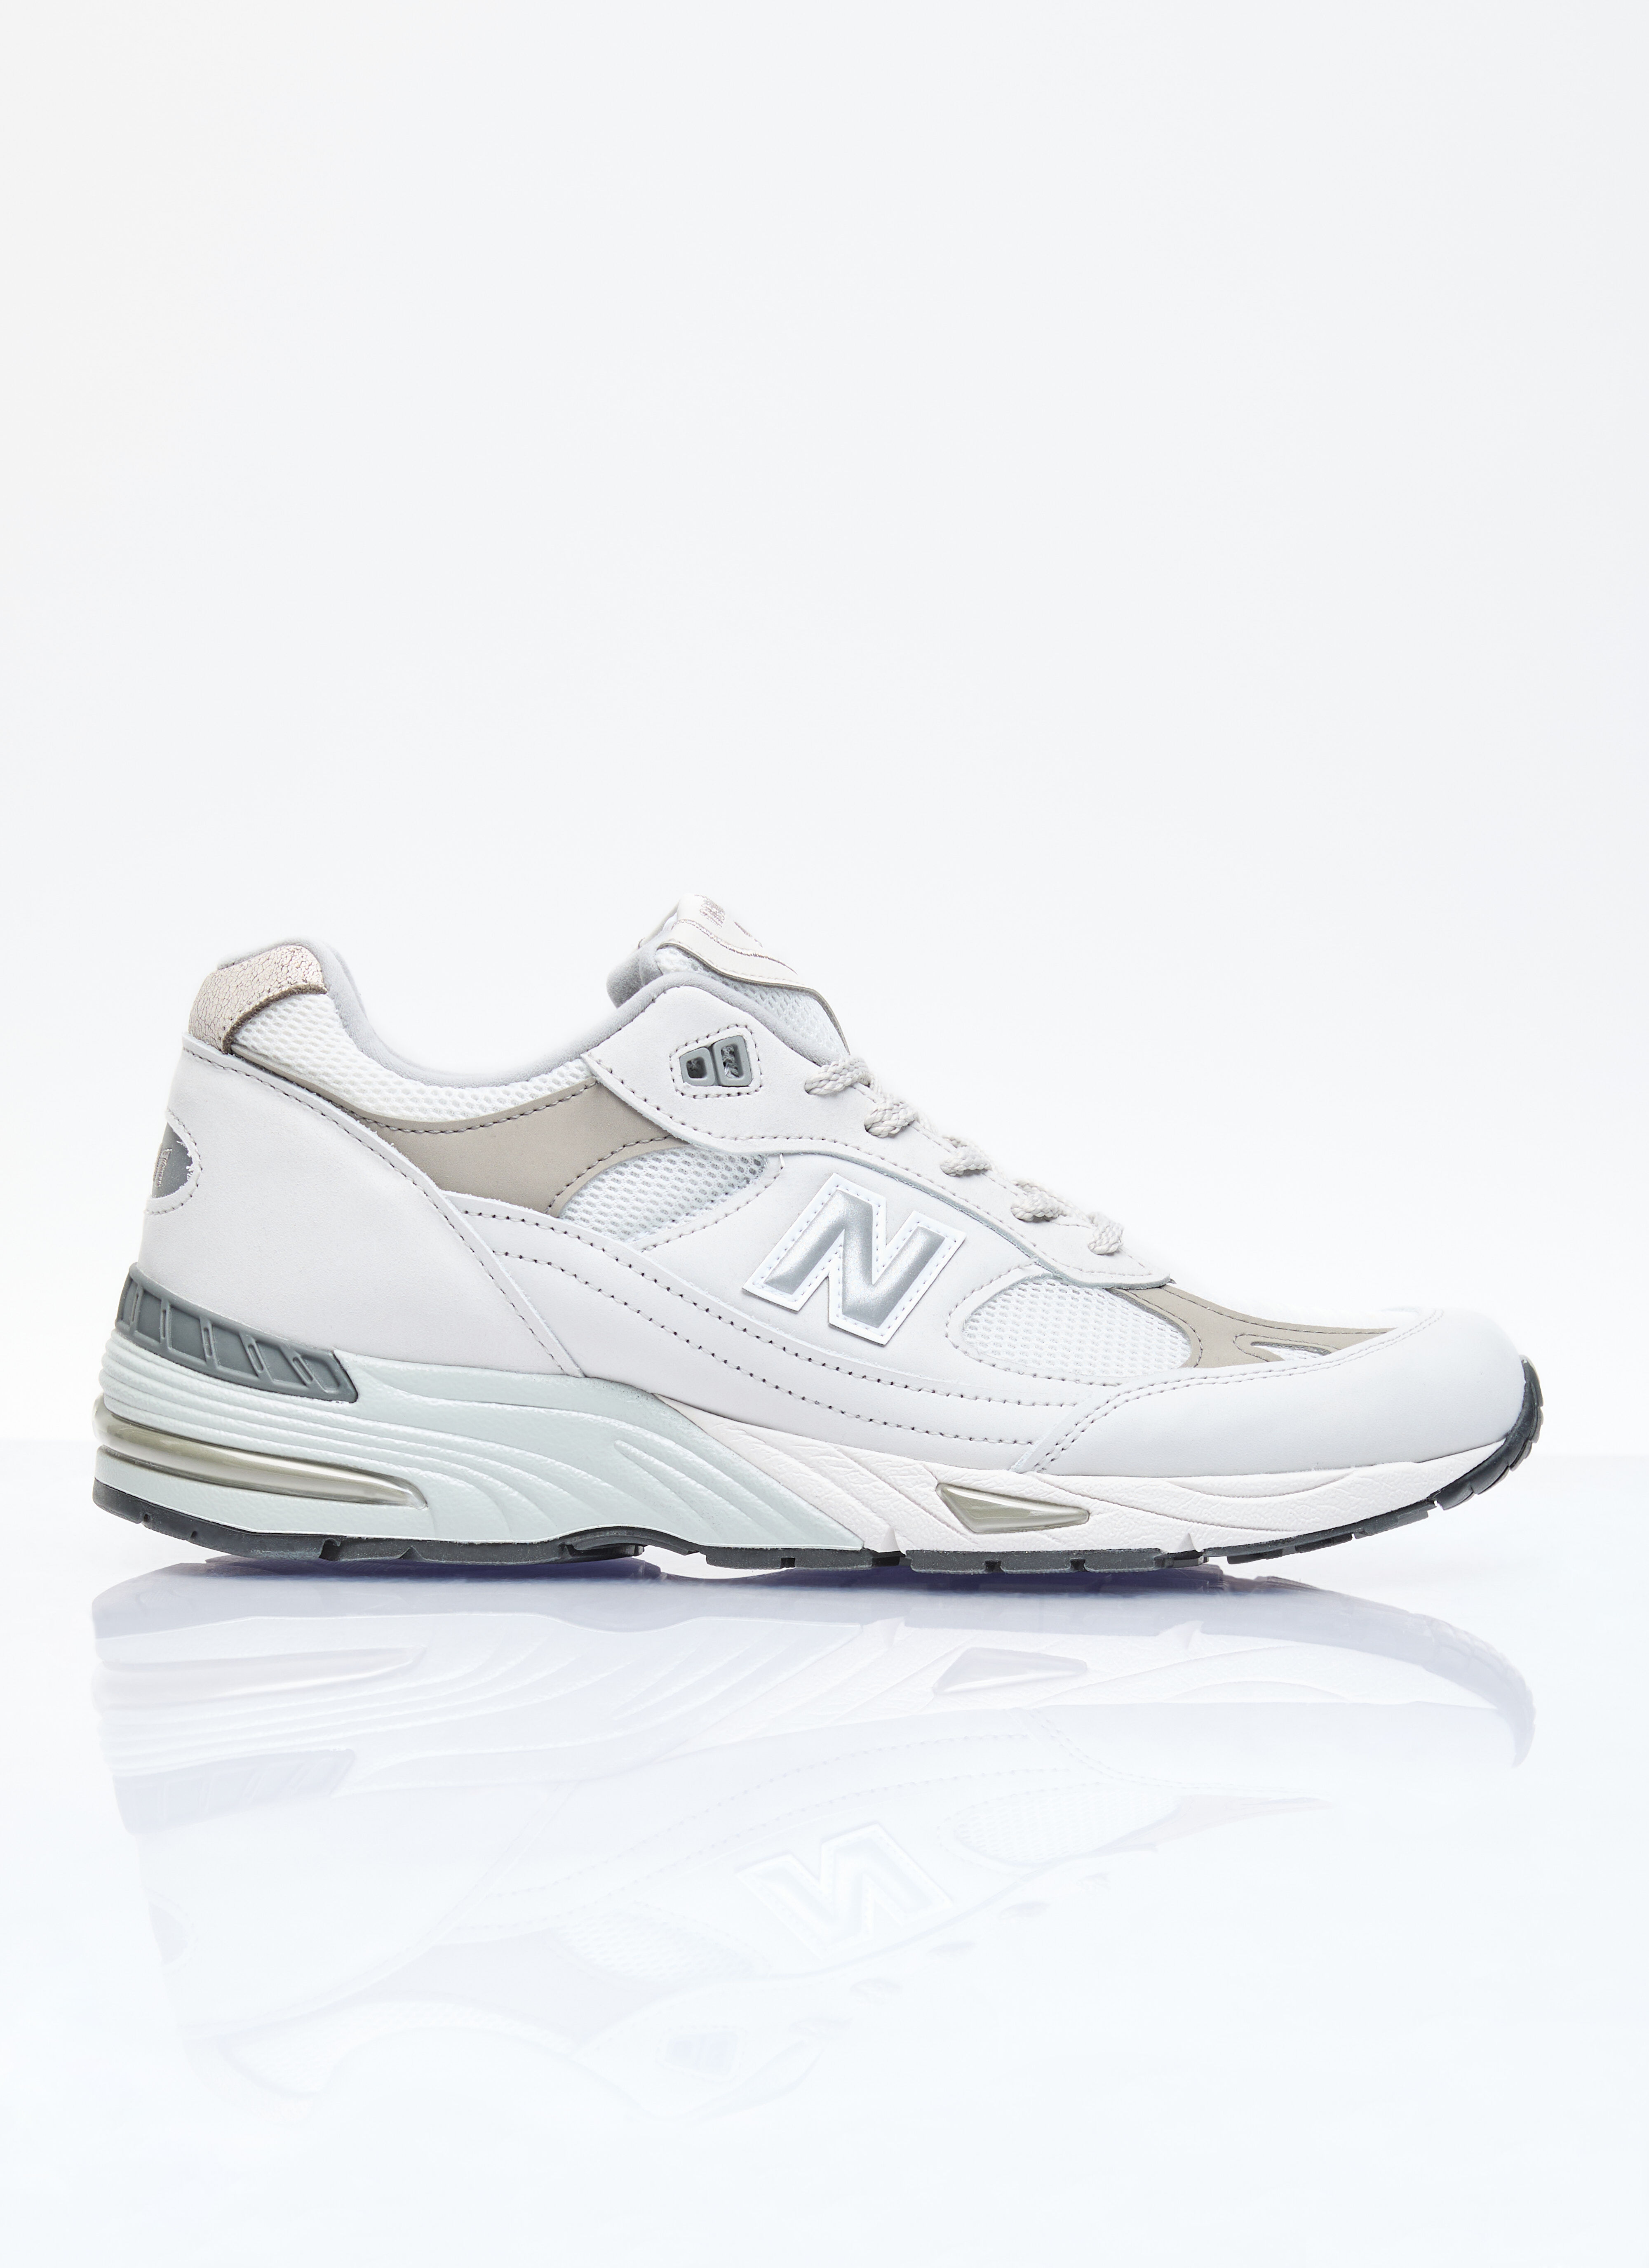 New Balance 991 Sneakers White new0156006